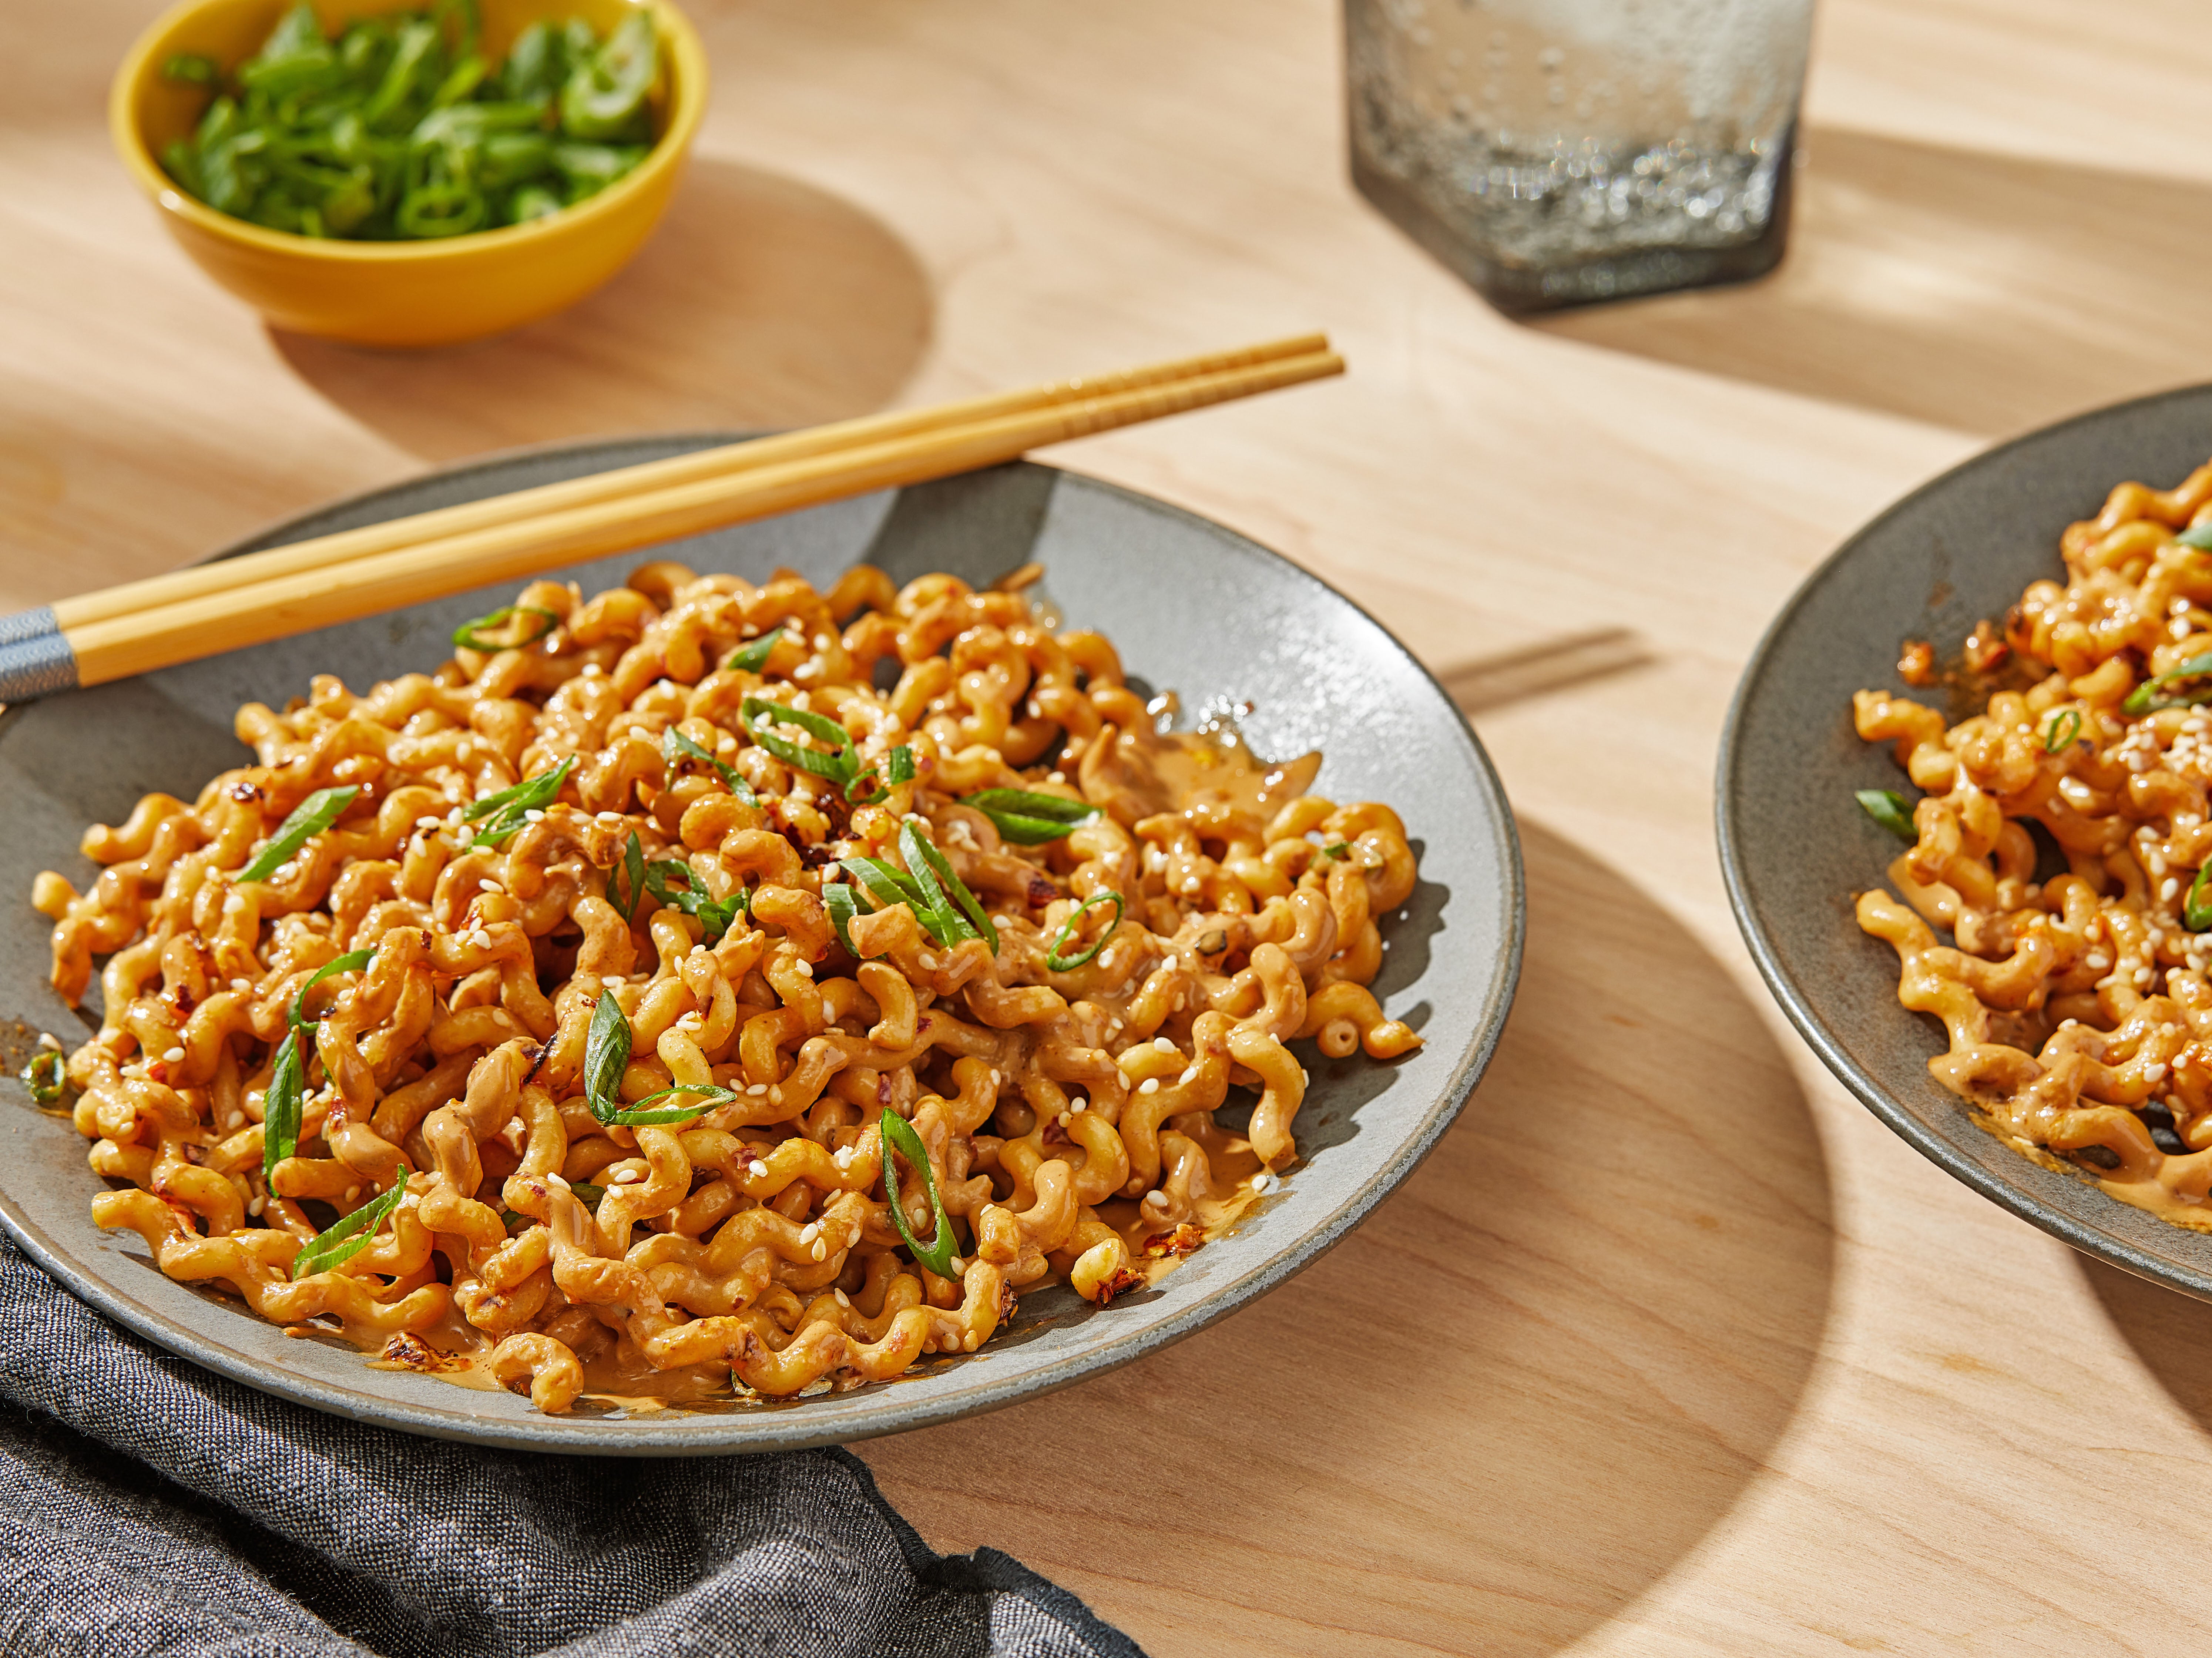 Chinese sesame paste and a spicy chilli oil turn these simple noodles into something complex, savoury and satisfying